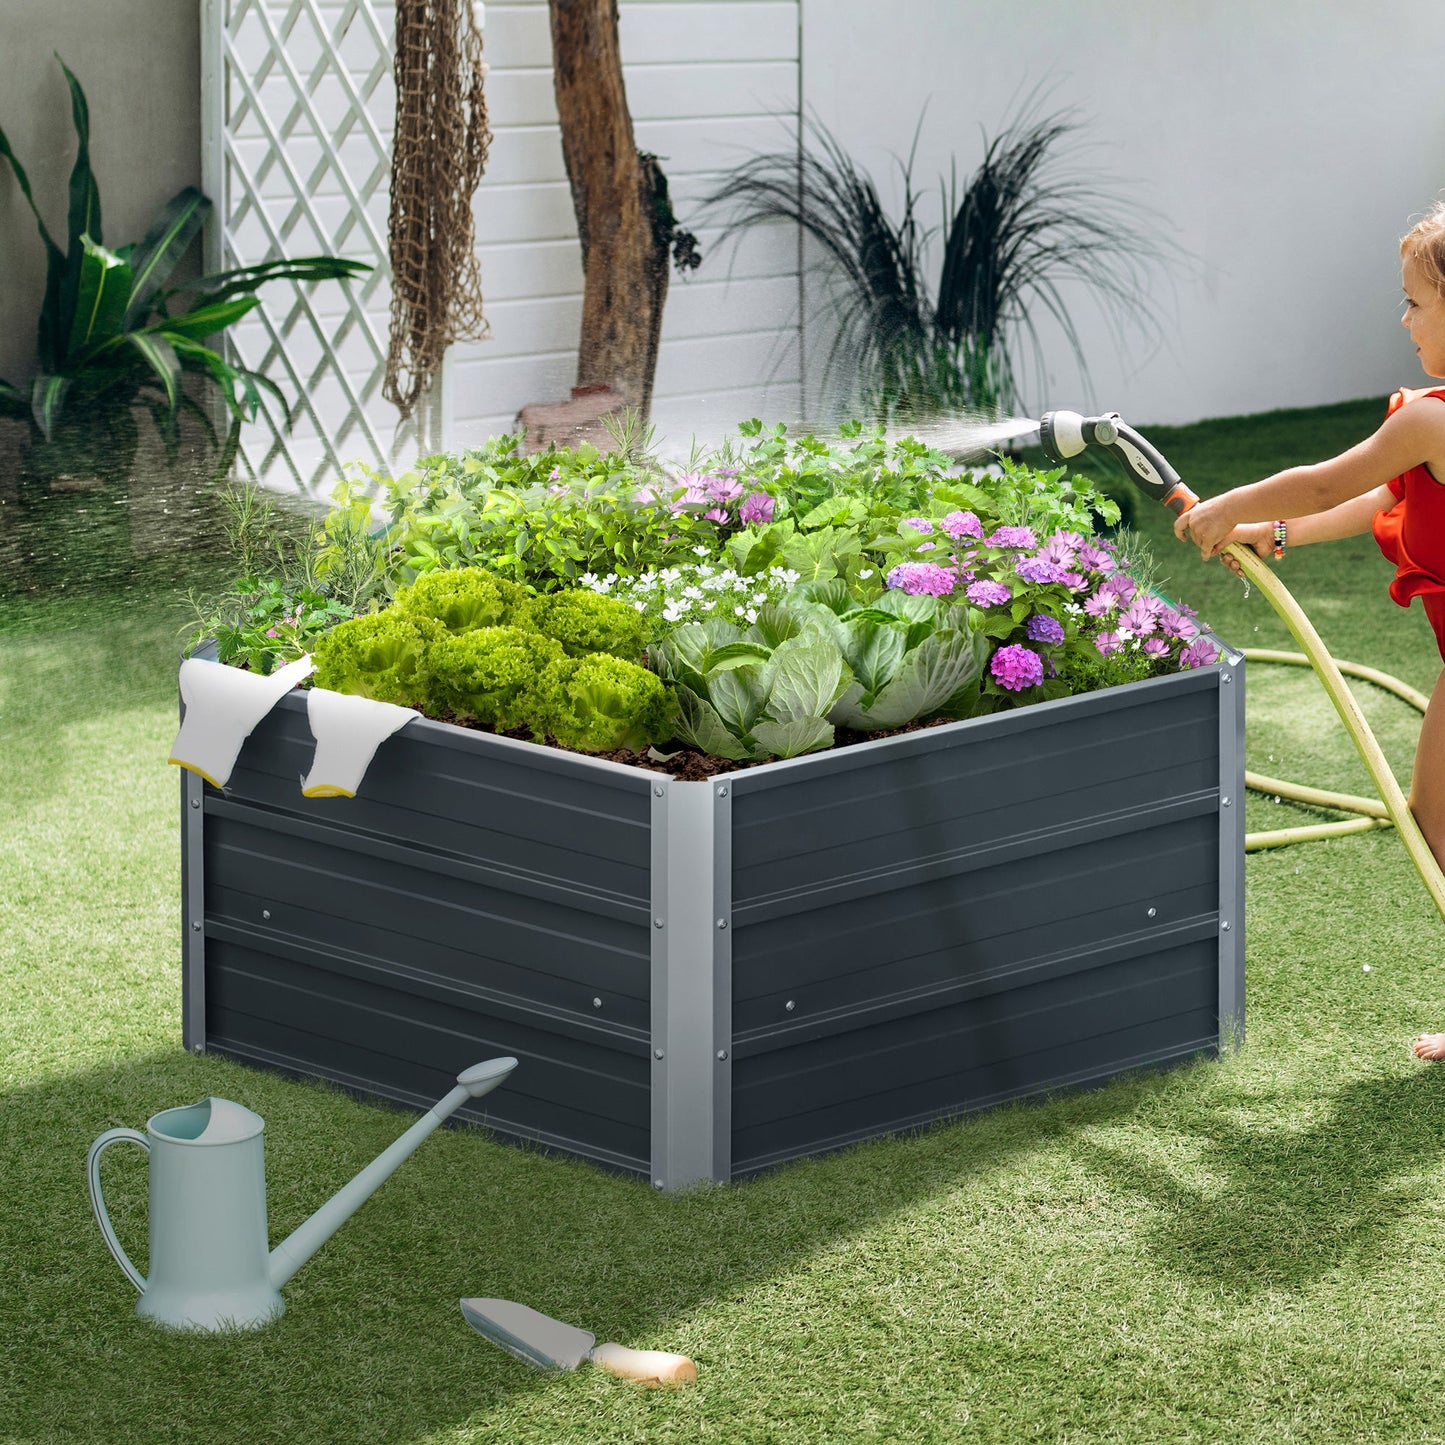 Outdoor and Garden-Pentagon Raised Garden Bed, Elevated Large Metal Planter Box w/ Install Gloves for Backyard, Patio to Grow Vegetables, Herbs, Grey - Outdoor Style Company